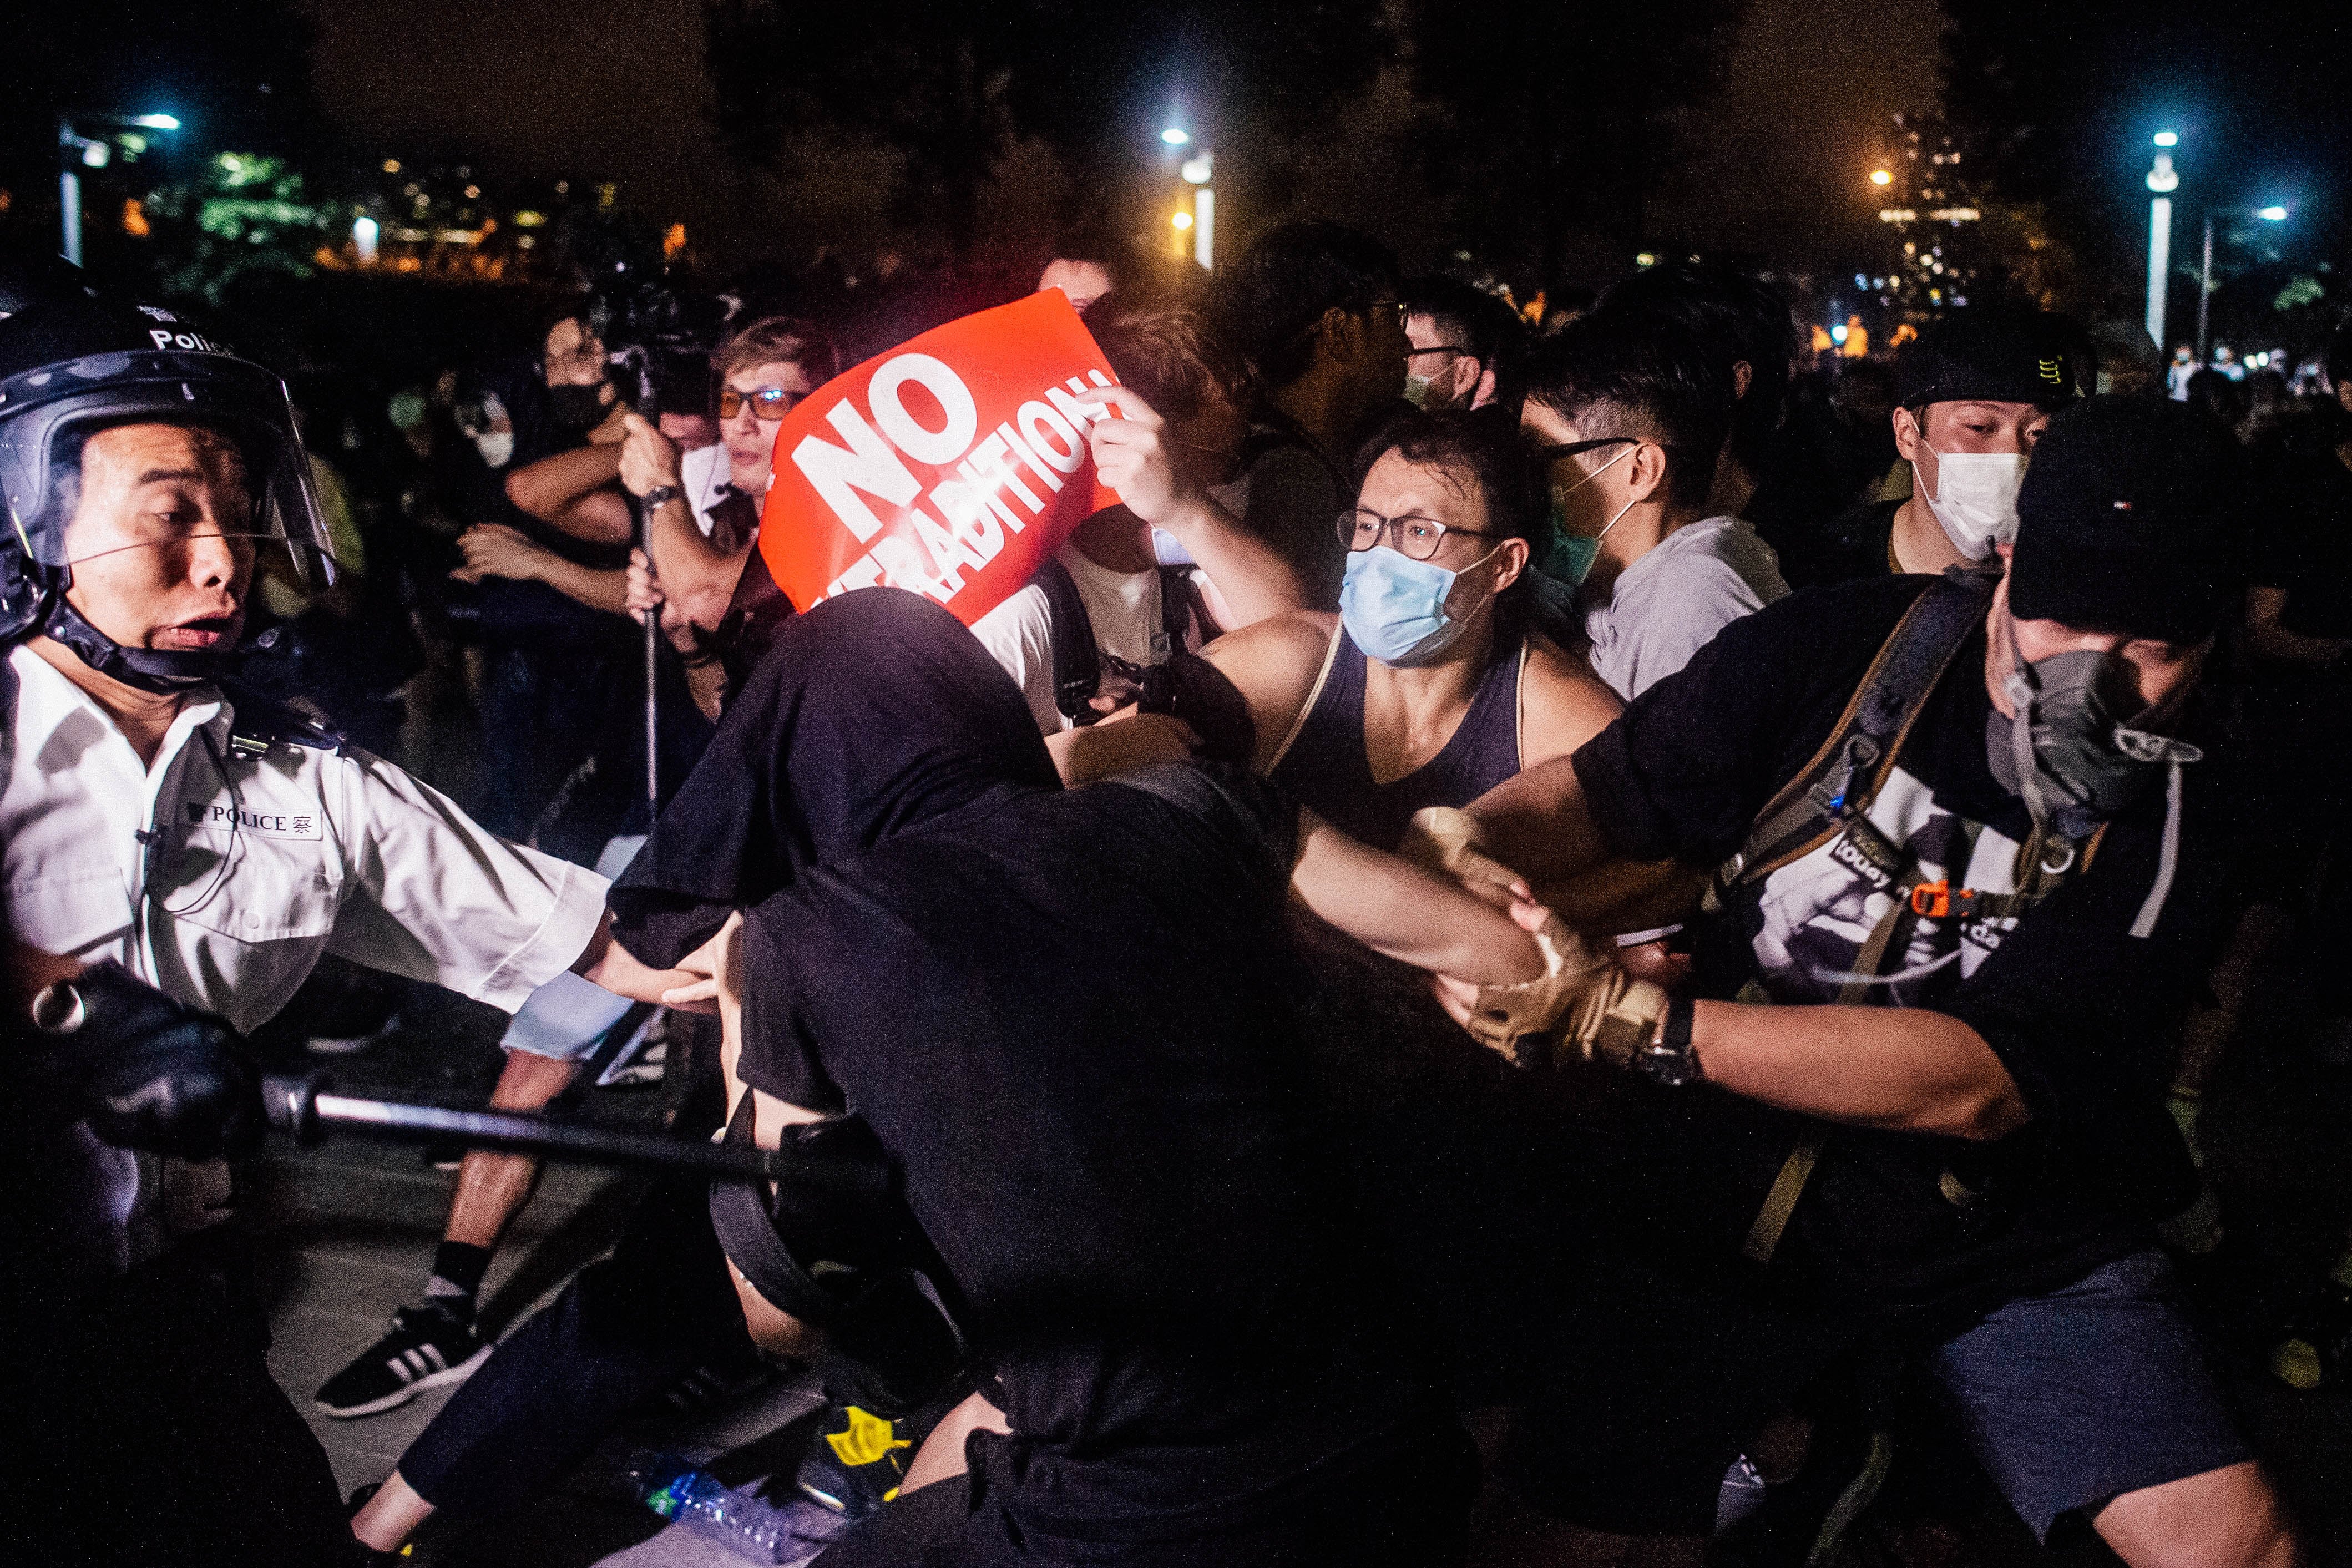 A protester holds a sign that says, "No extradition," amid a tussle with police.